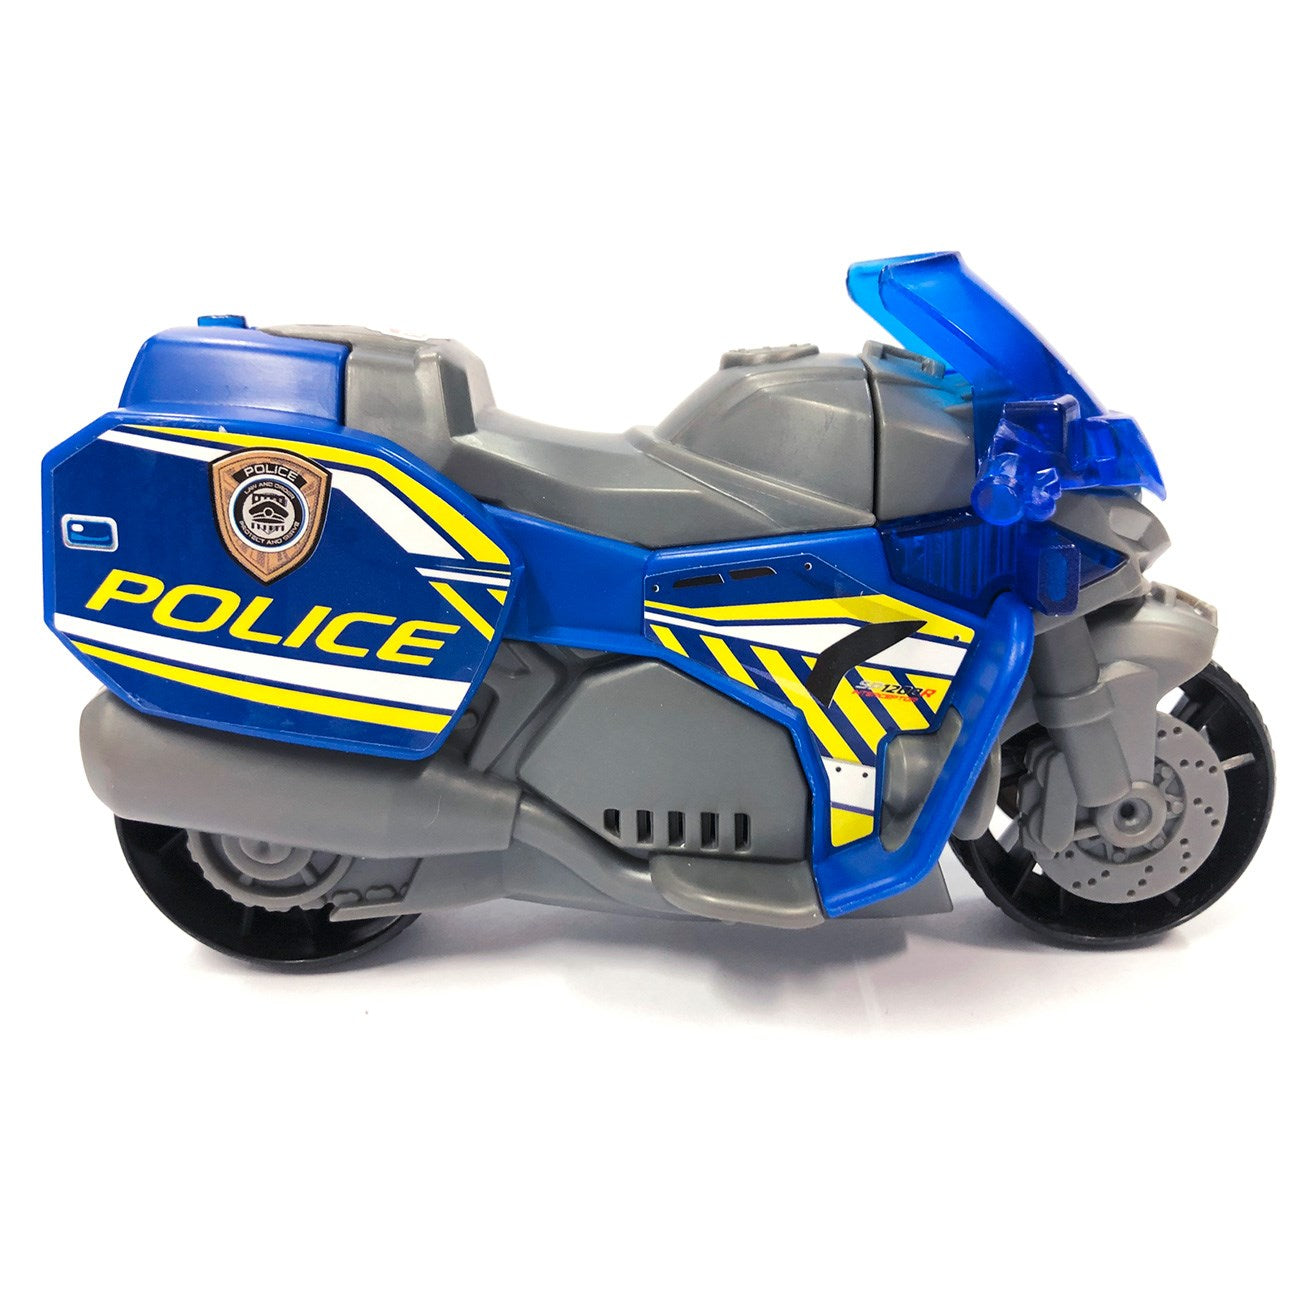 Dickie Toys Police Motorcycle 6